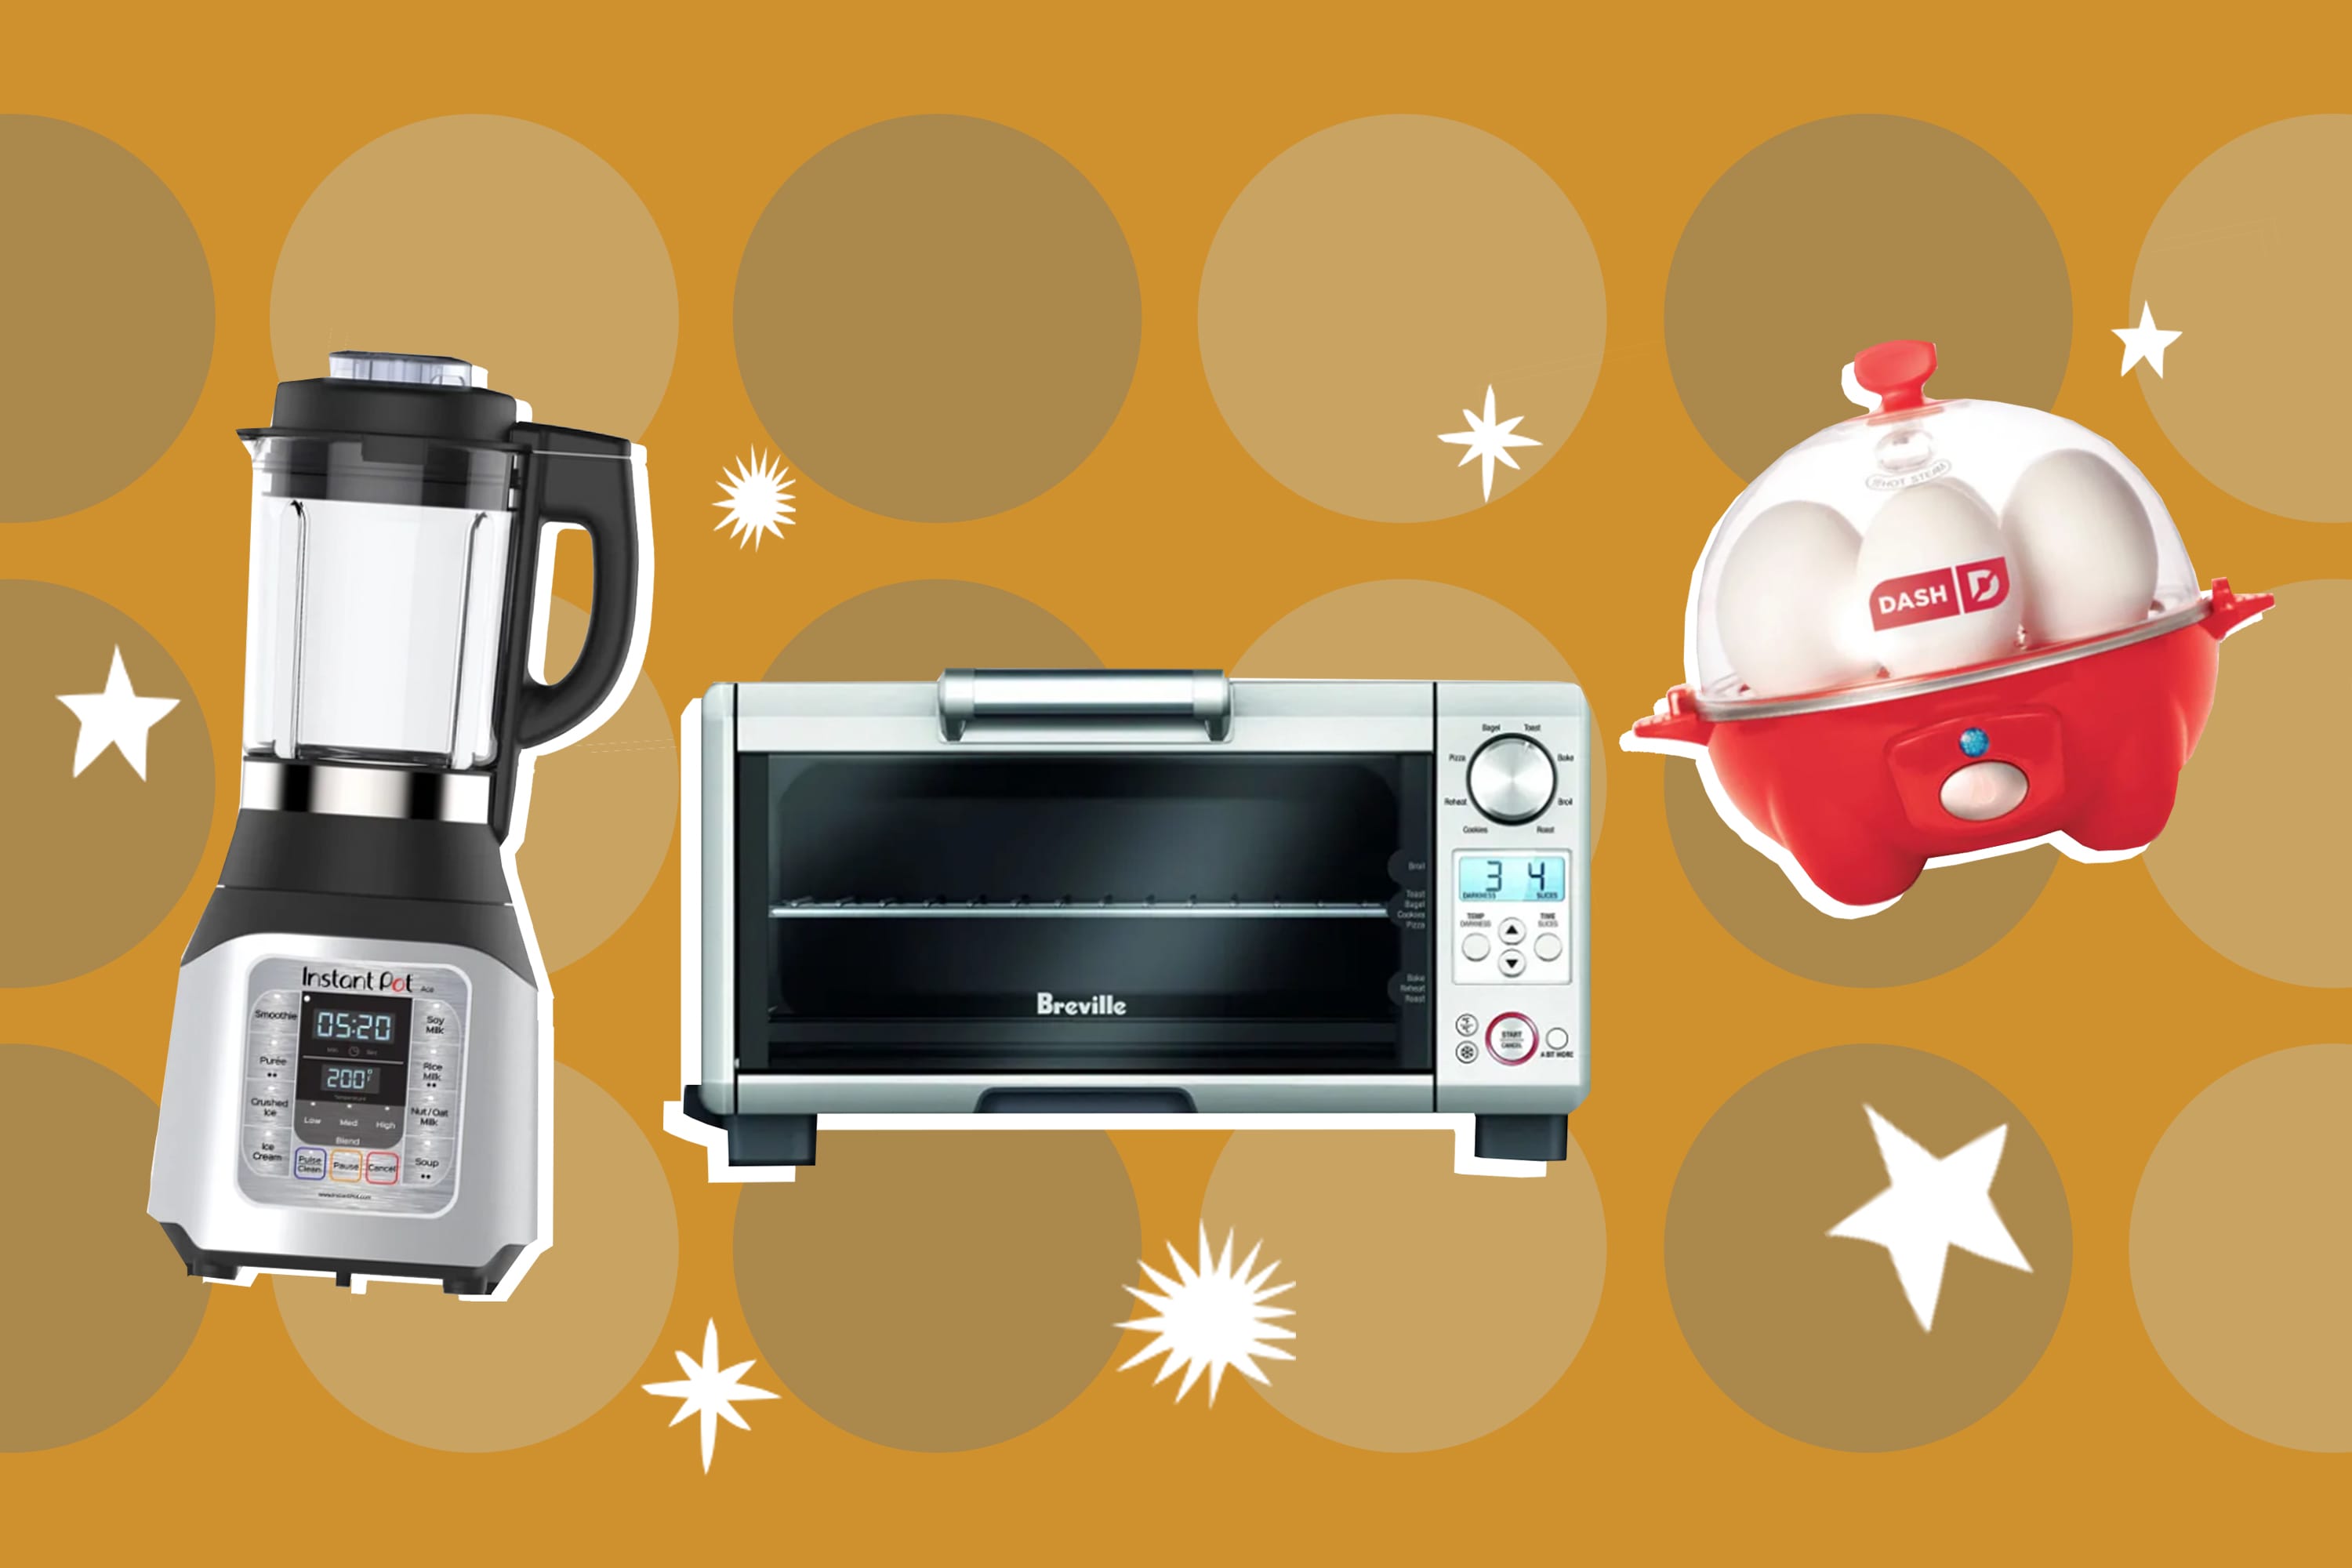 15 Awesome Small Kitchen Appliances. For your own wish list or as a gift  guide for others, these …